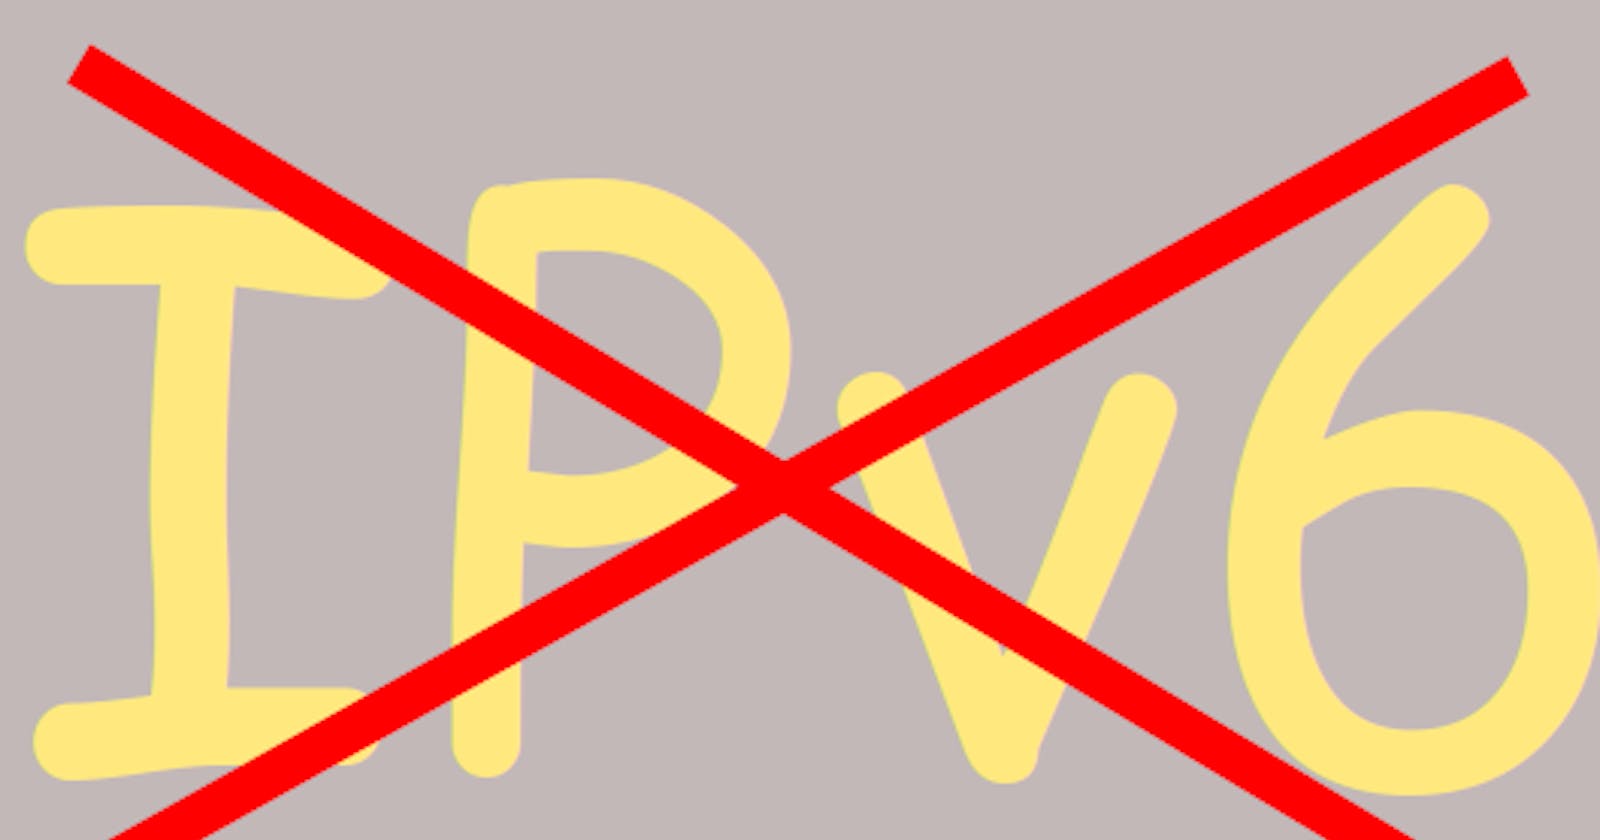 IPv6: MLD: clamping QRV from 1 to 2!
How to disable ipv6 in linux at kernel level